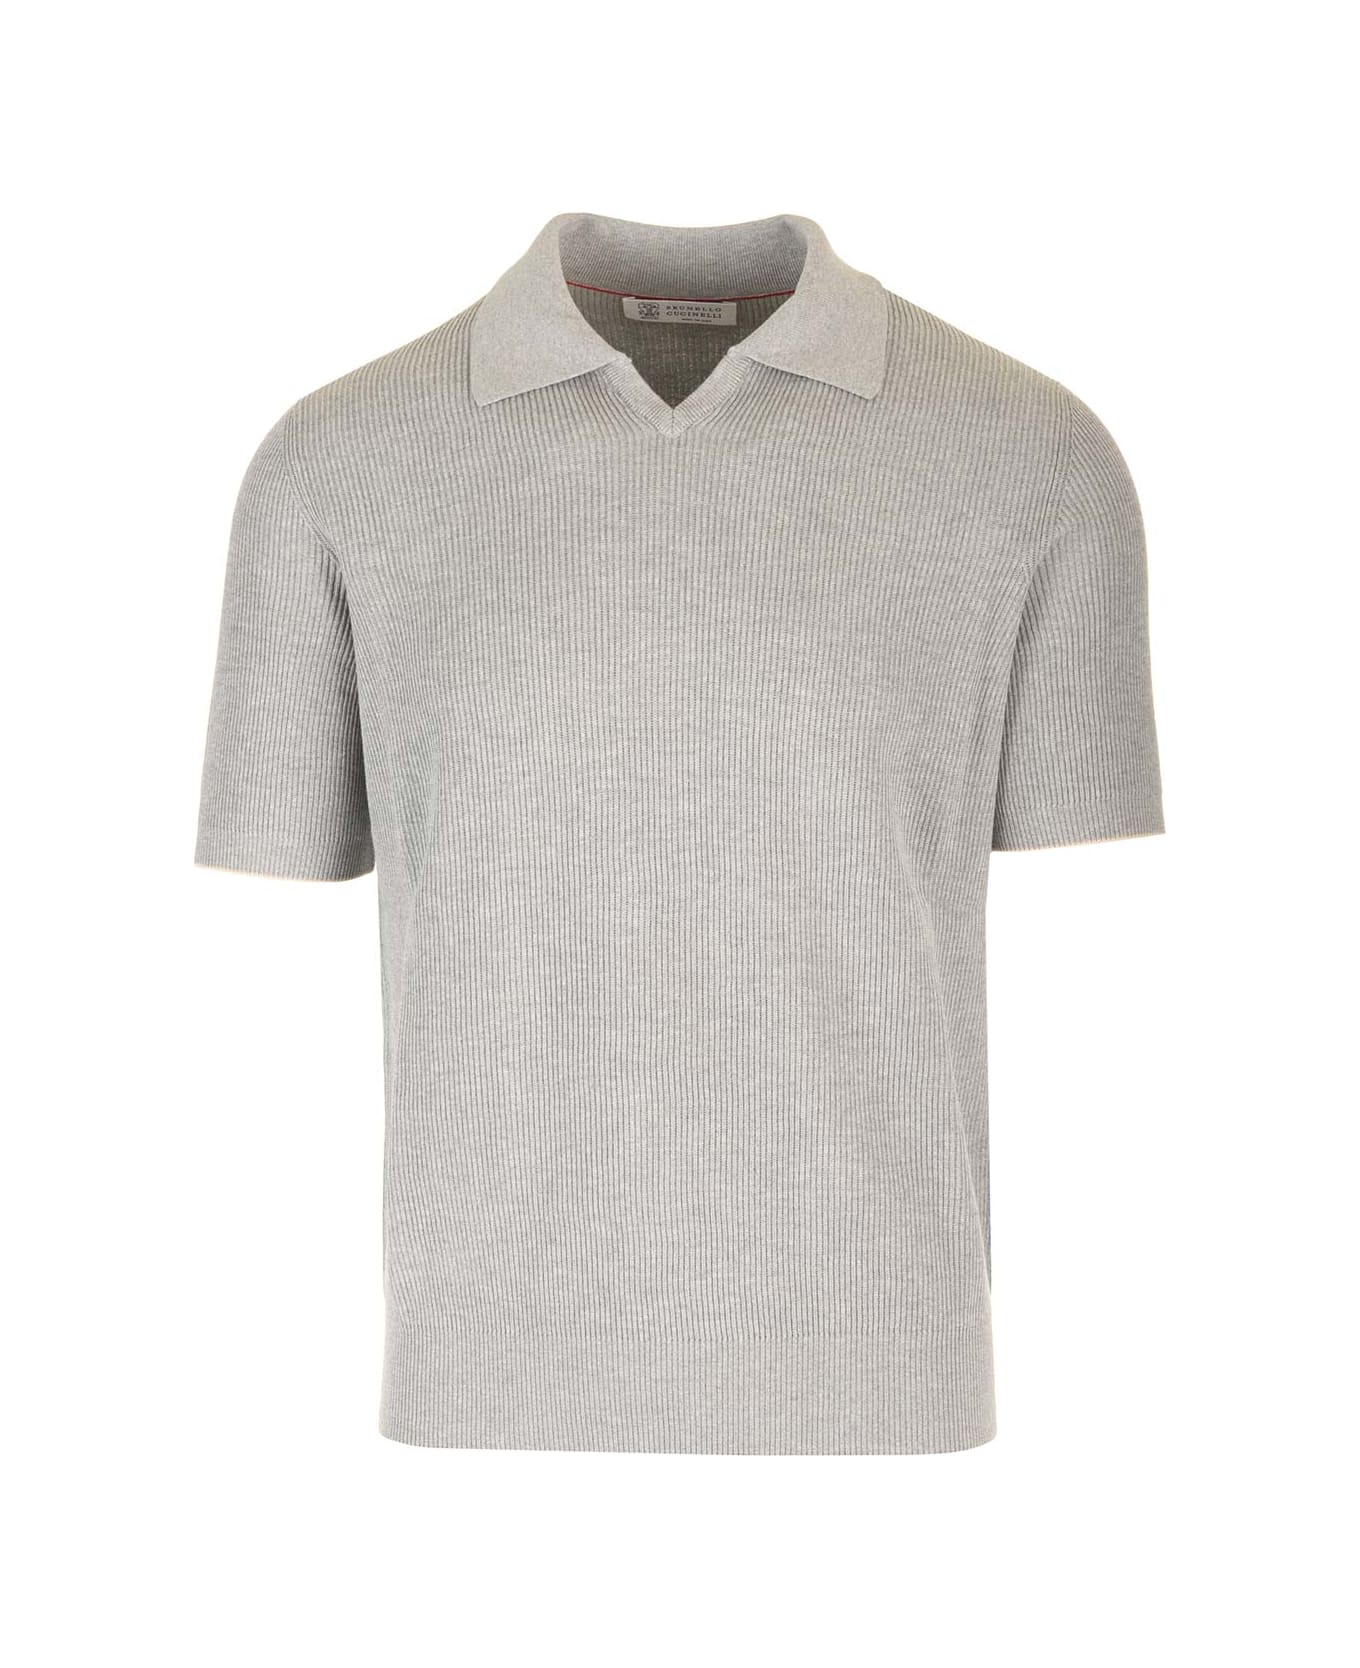 Brunello Cucinelli Knitted Polo Shirt - Grey ポロシャツ